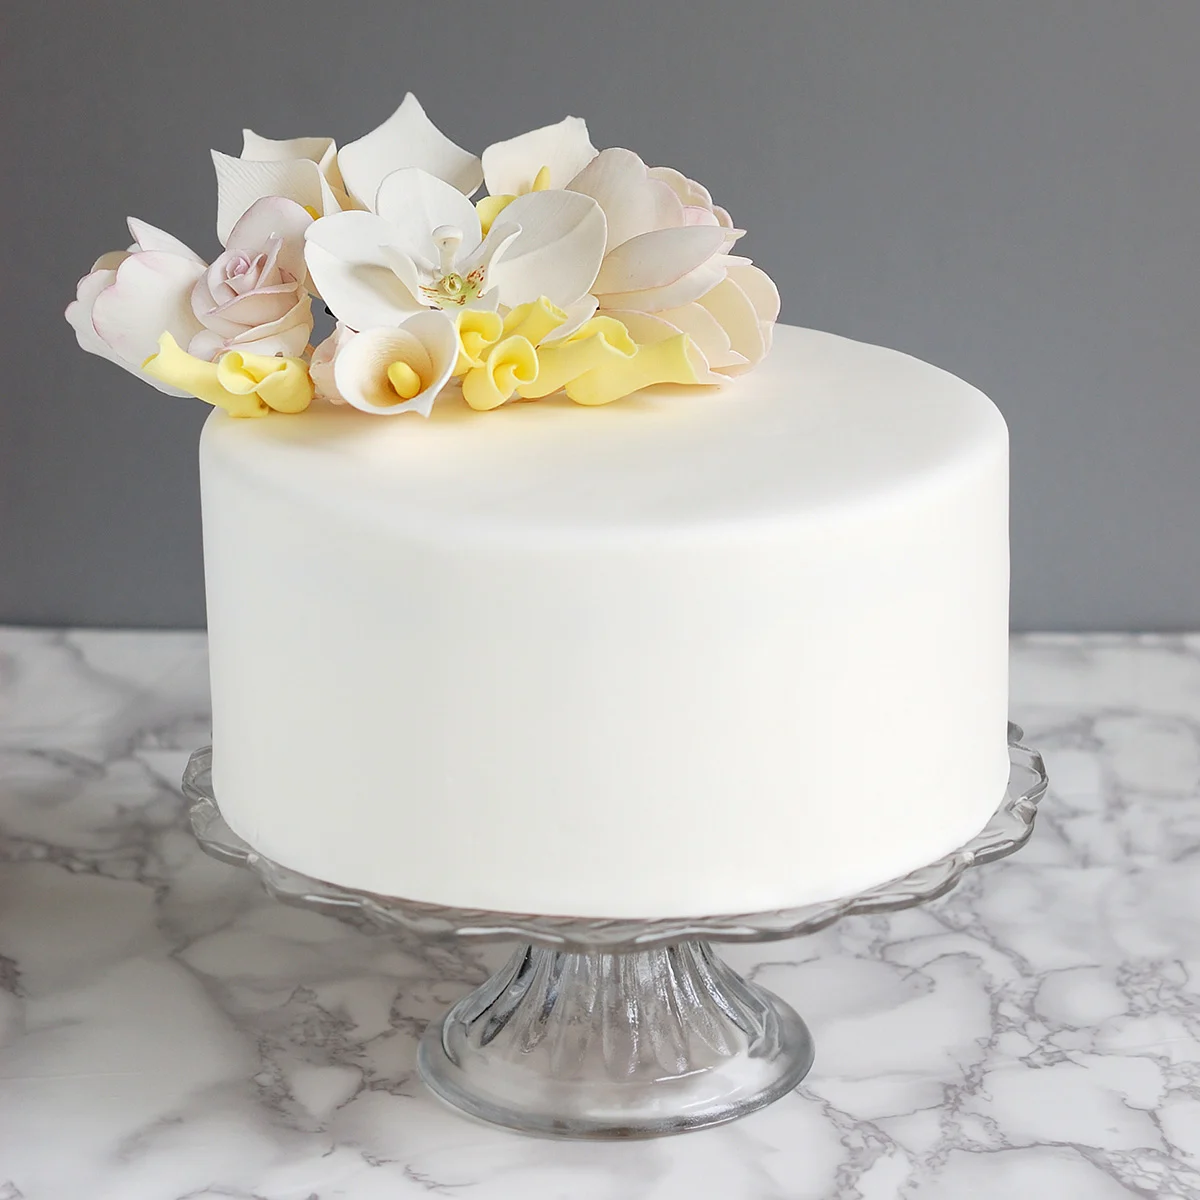 Lindy Smith's tried and tested sugarpaste recipe - easier than you think!